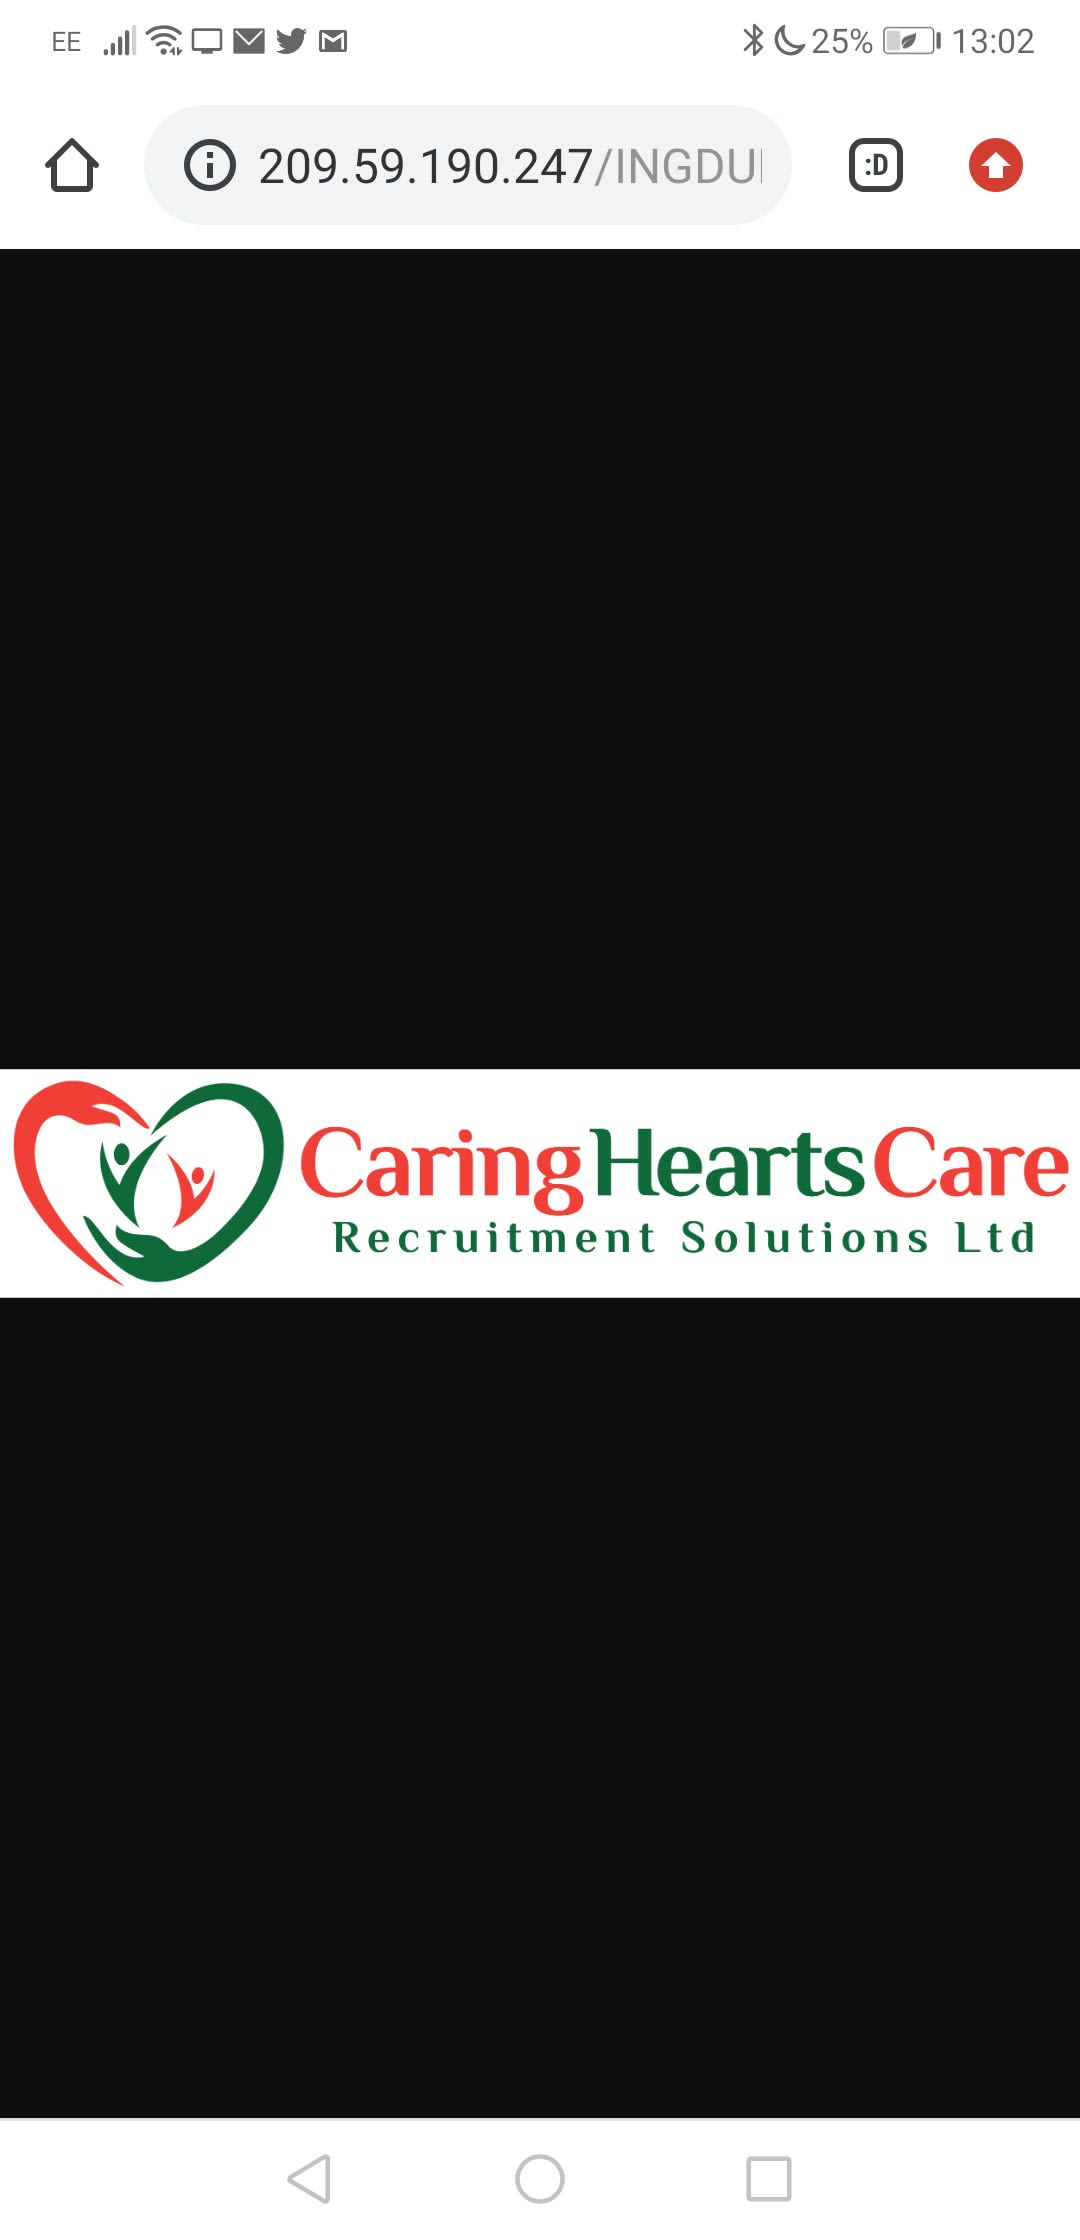 Caring Hearts Care Recruitment Solutions Ltd